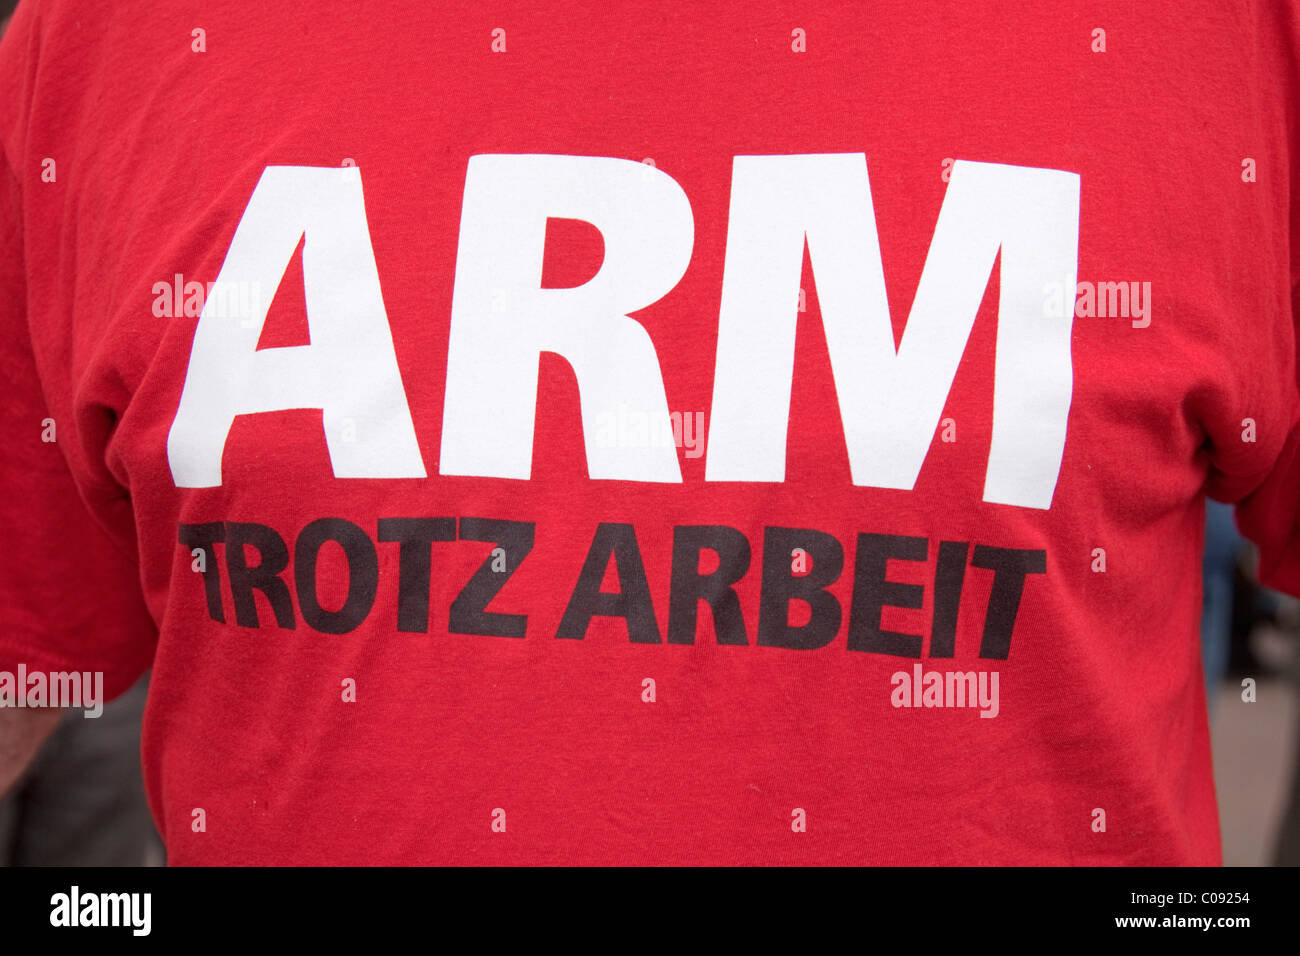 'Arm trotz Arbeit', poor despite being employed, printed on a T-shirt Stock Photo